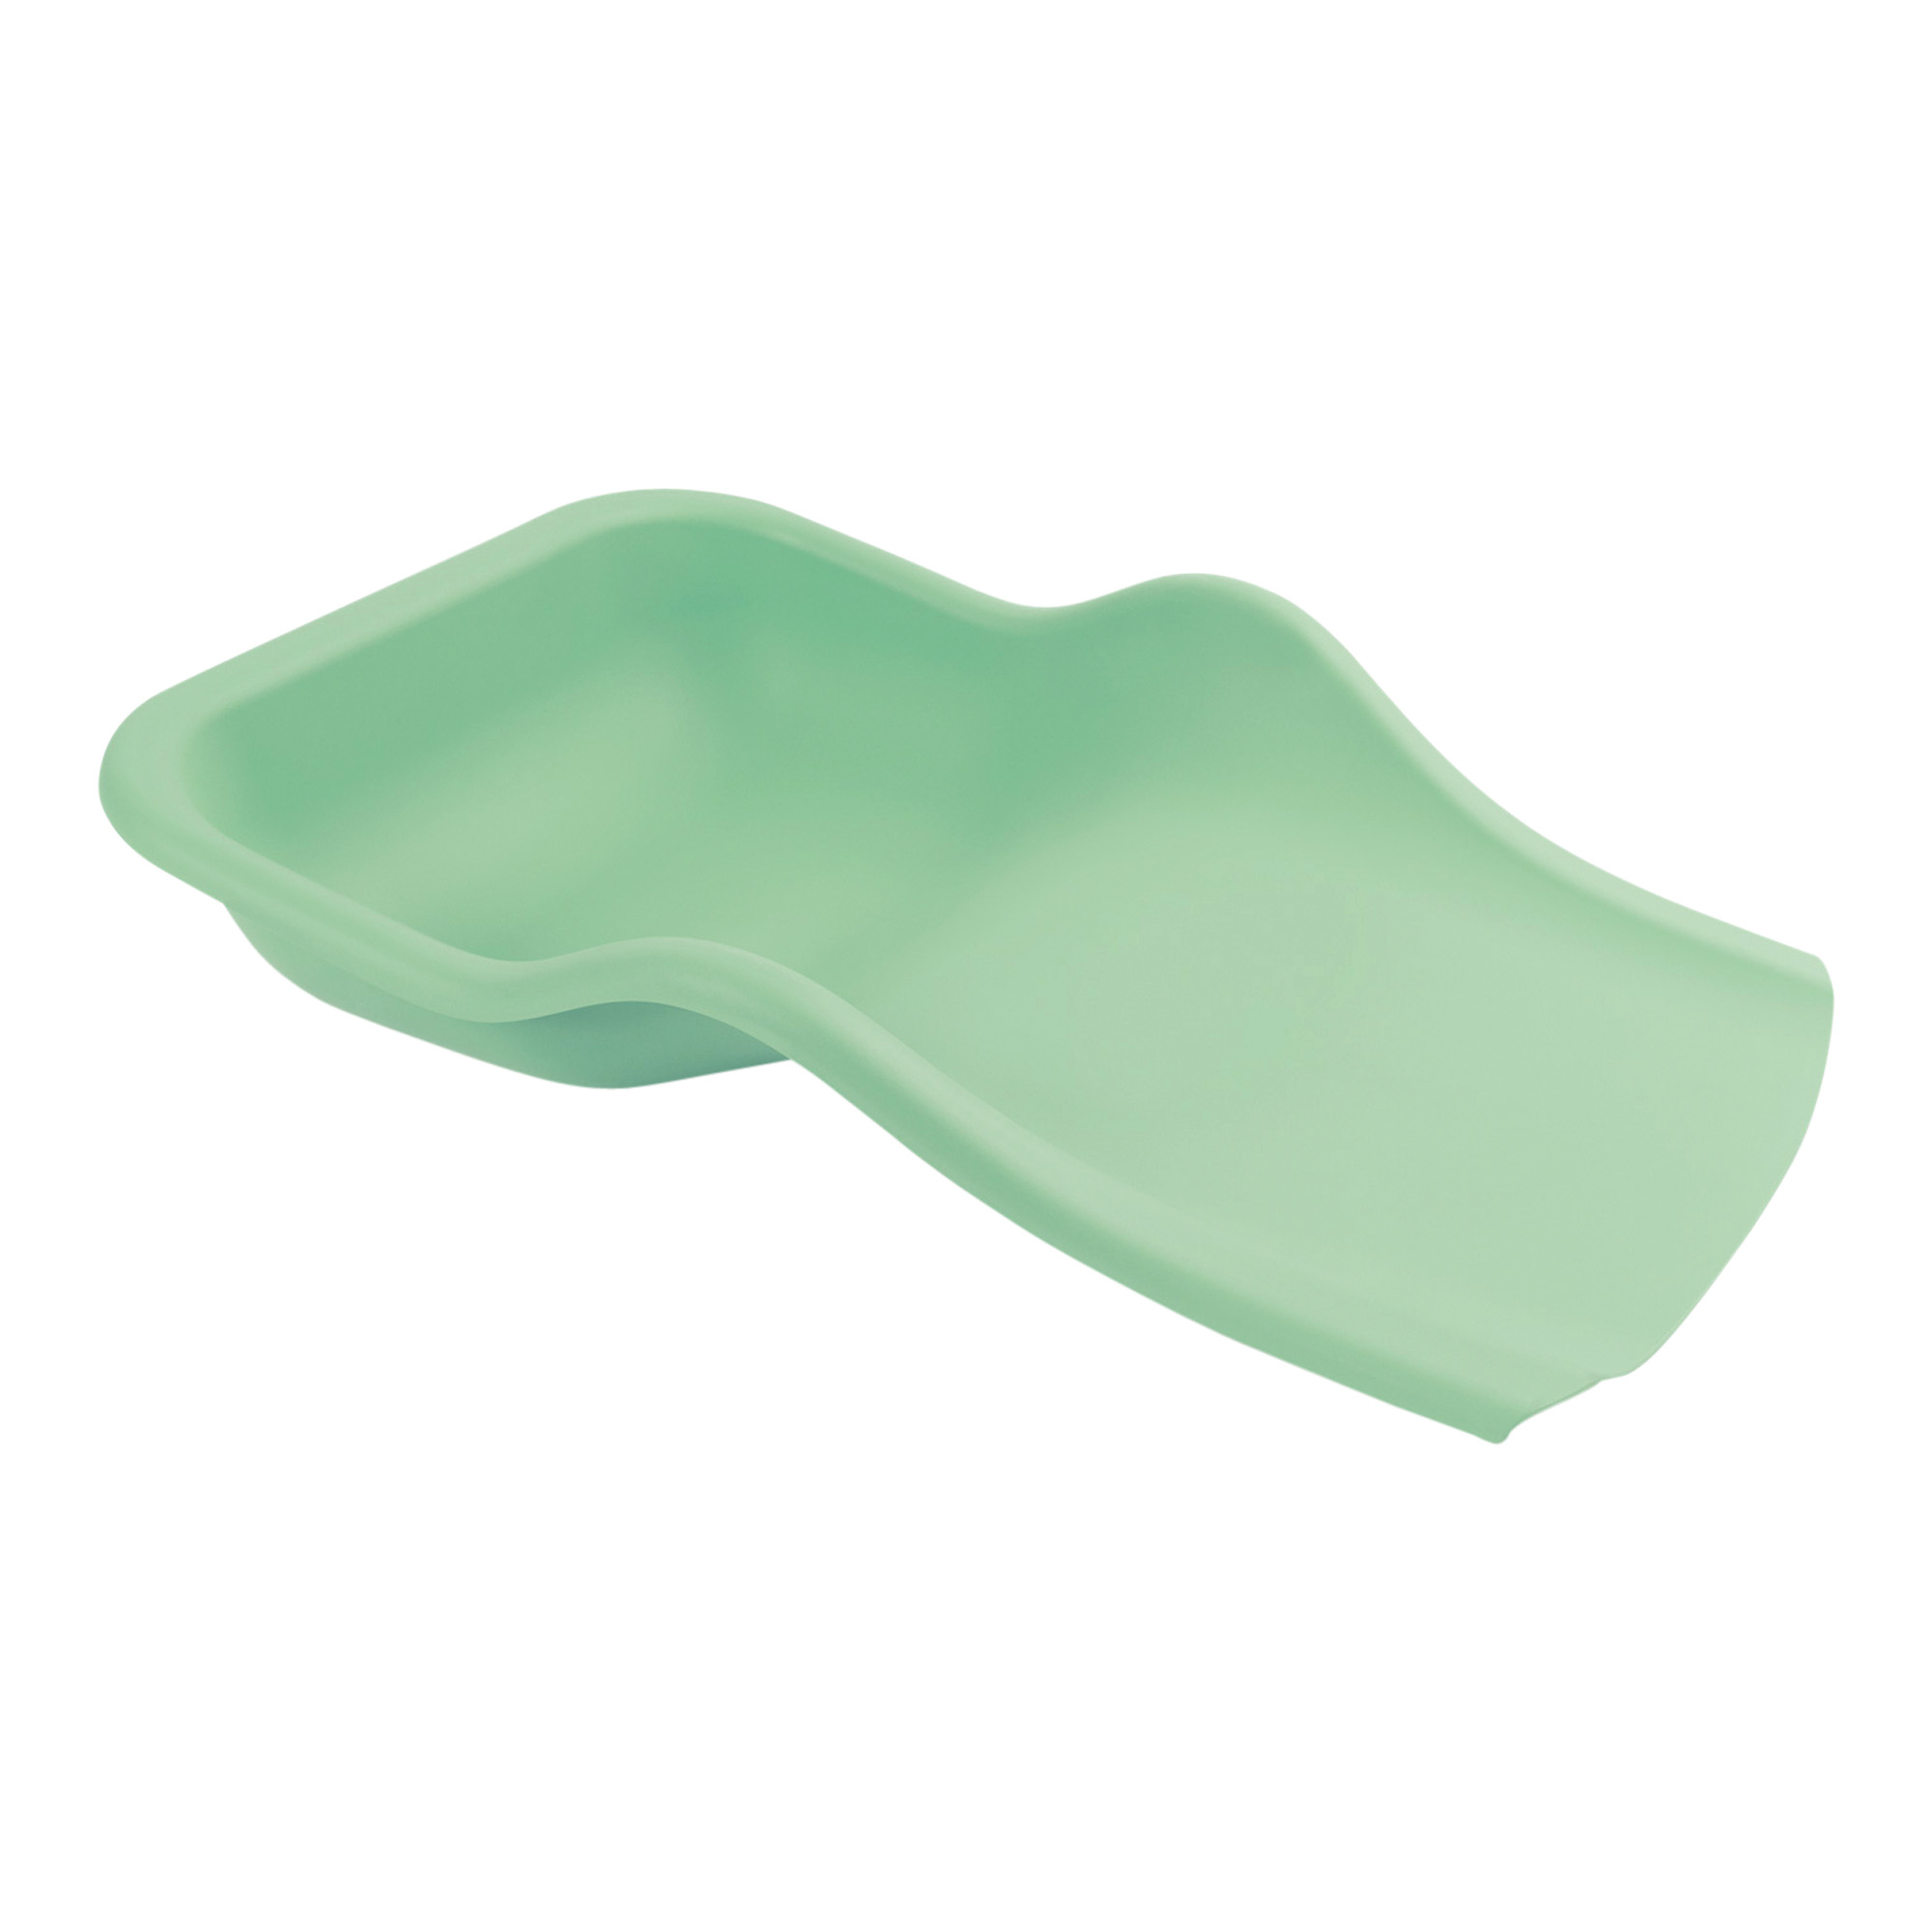 Flexible tray for the collection of pedicure residues on the foot mint green